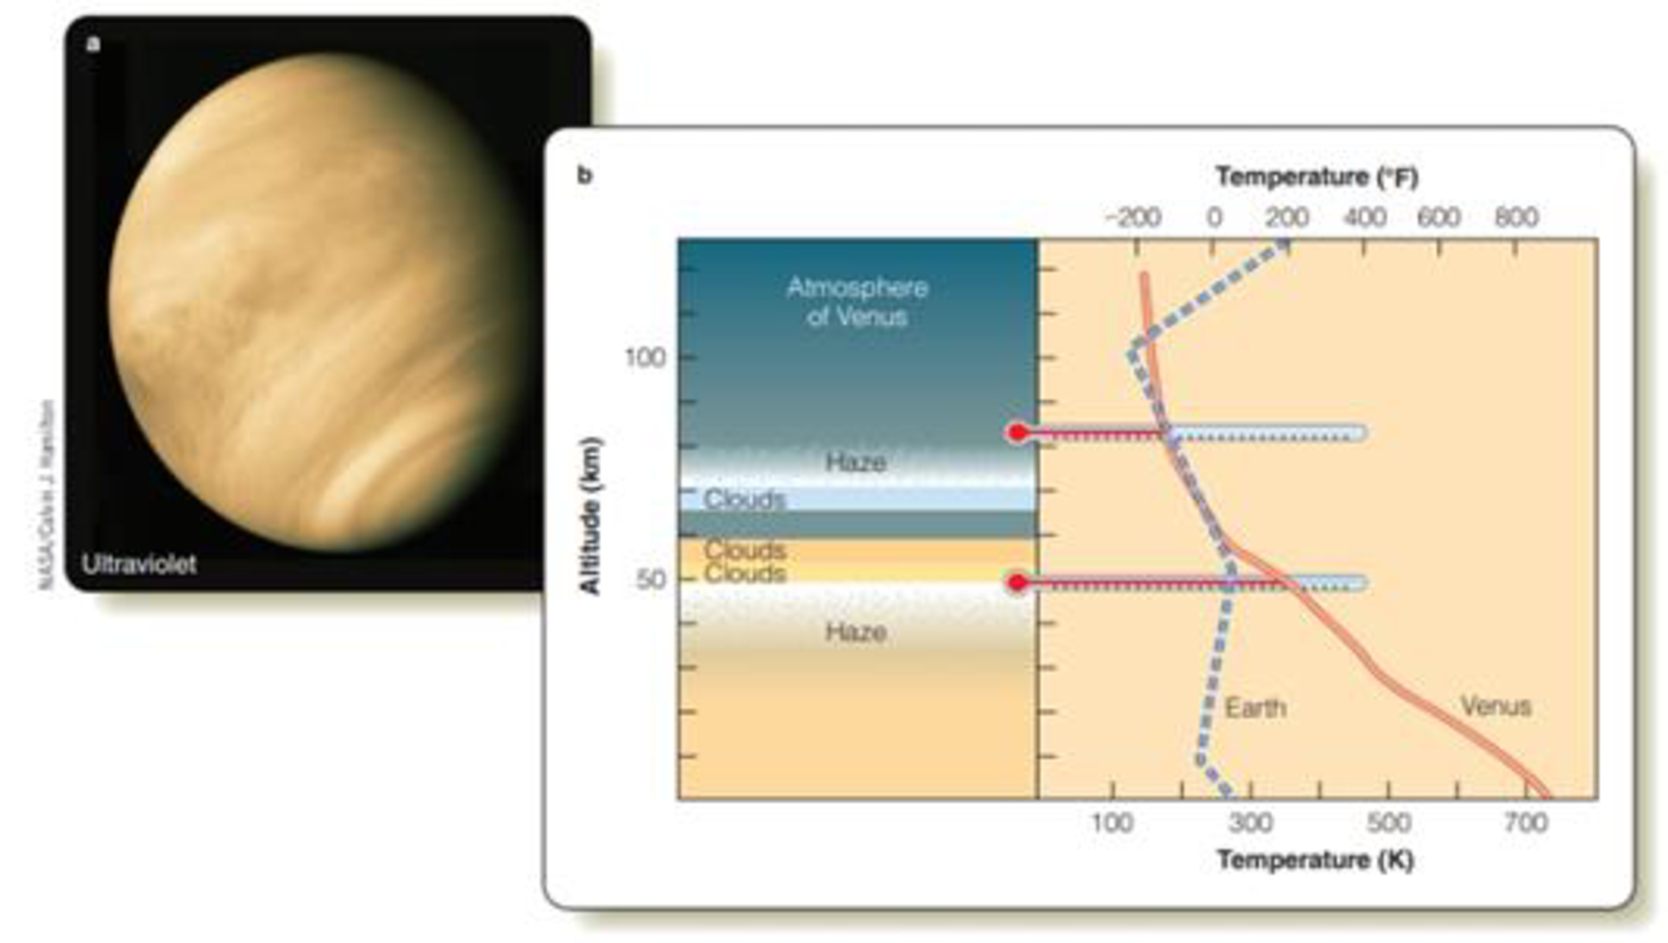 Chapter 21, Problem 1LTL, Look at Figure 21-1. Compare temperature profiles of Venuss and Earths atmospheres. Describe the 